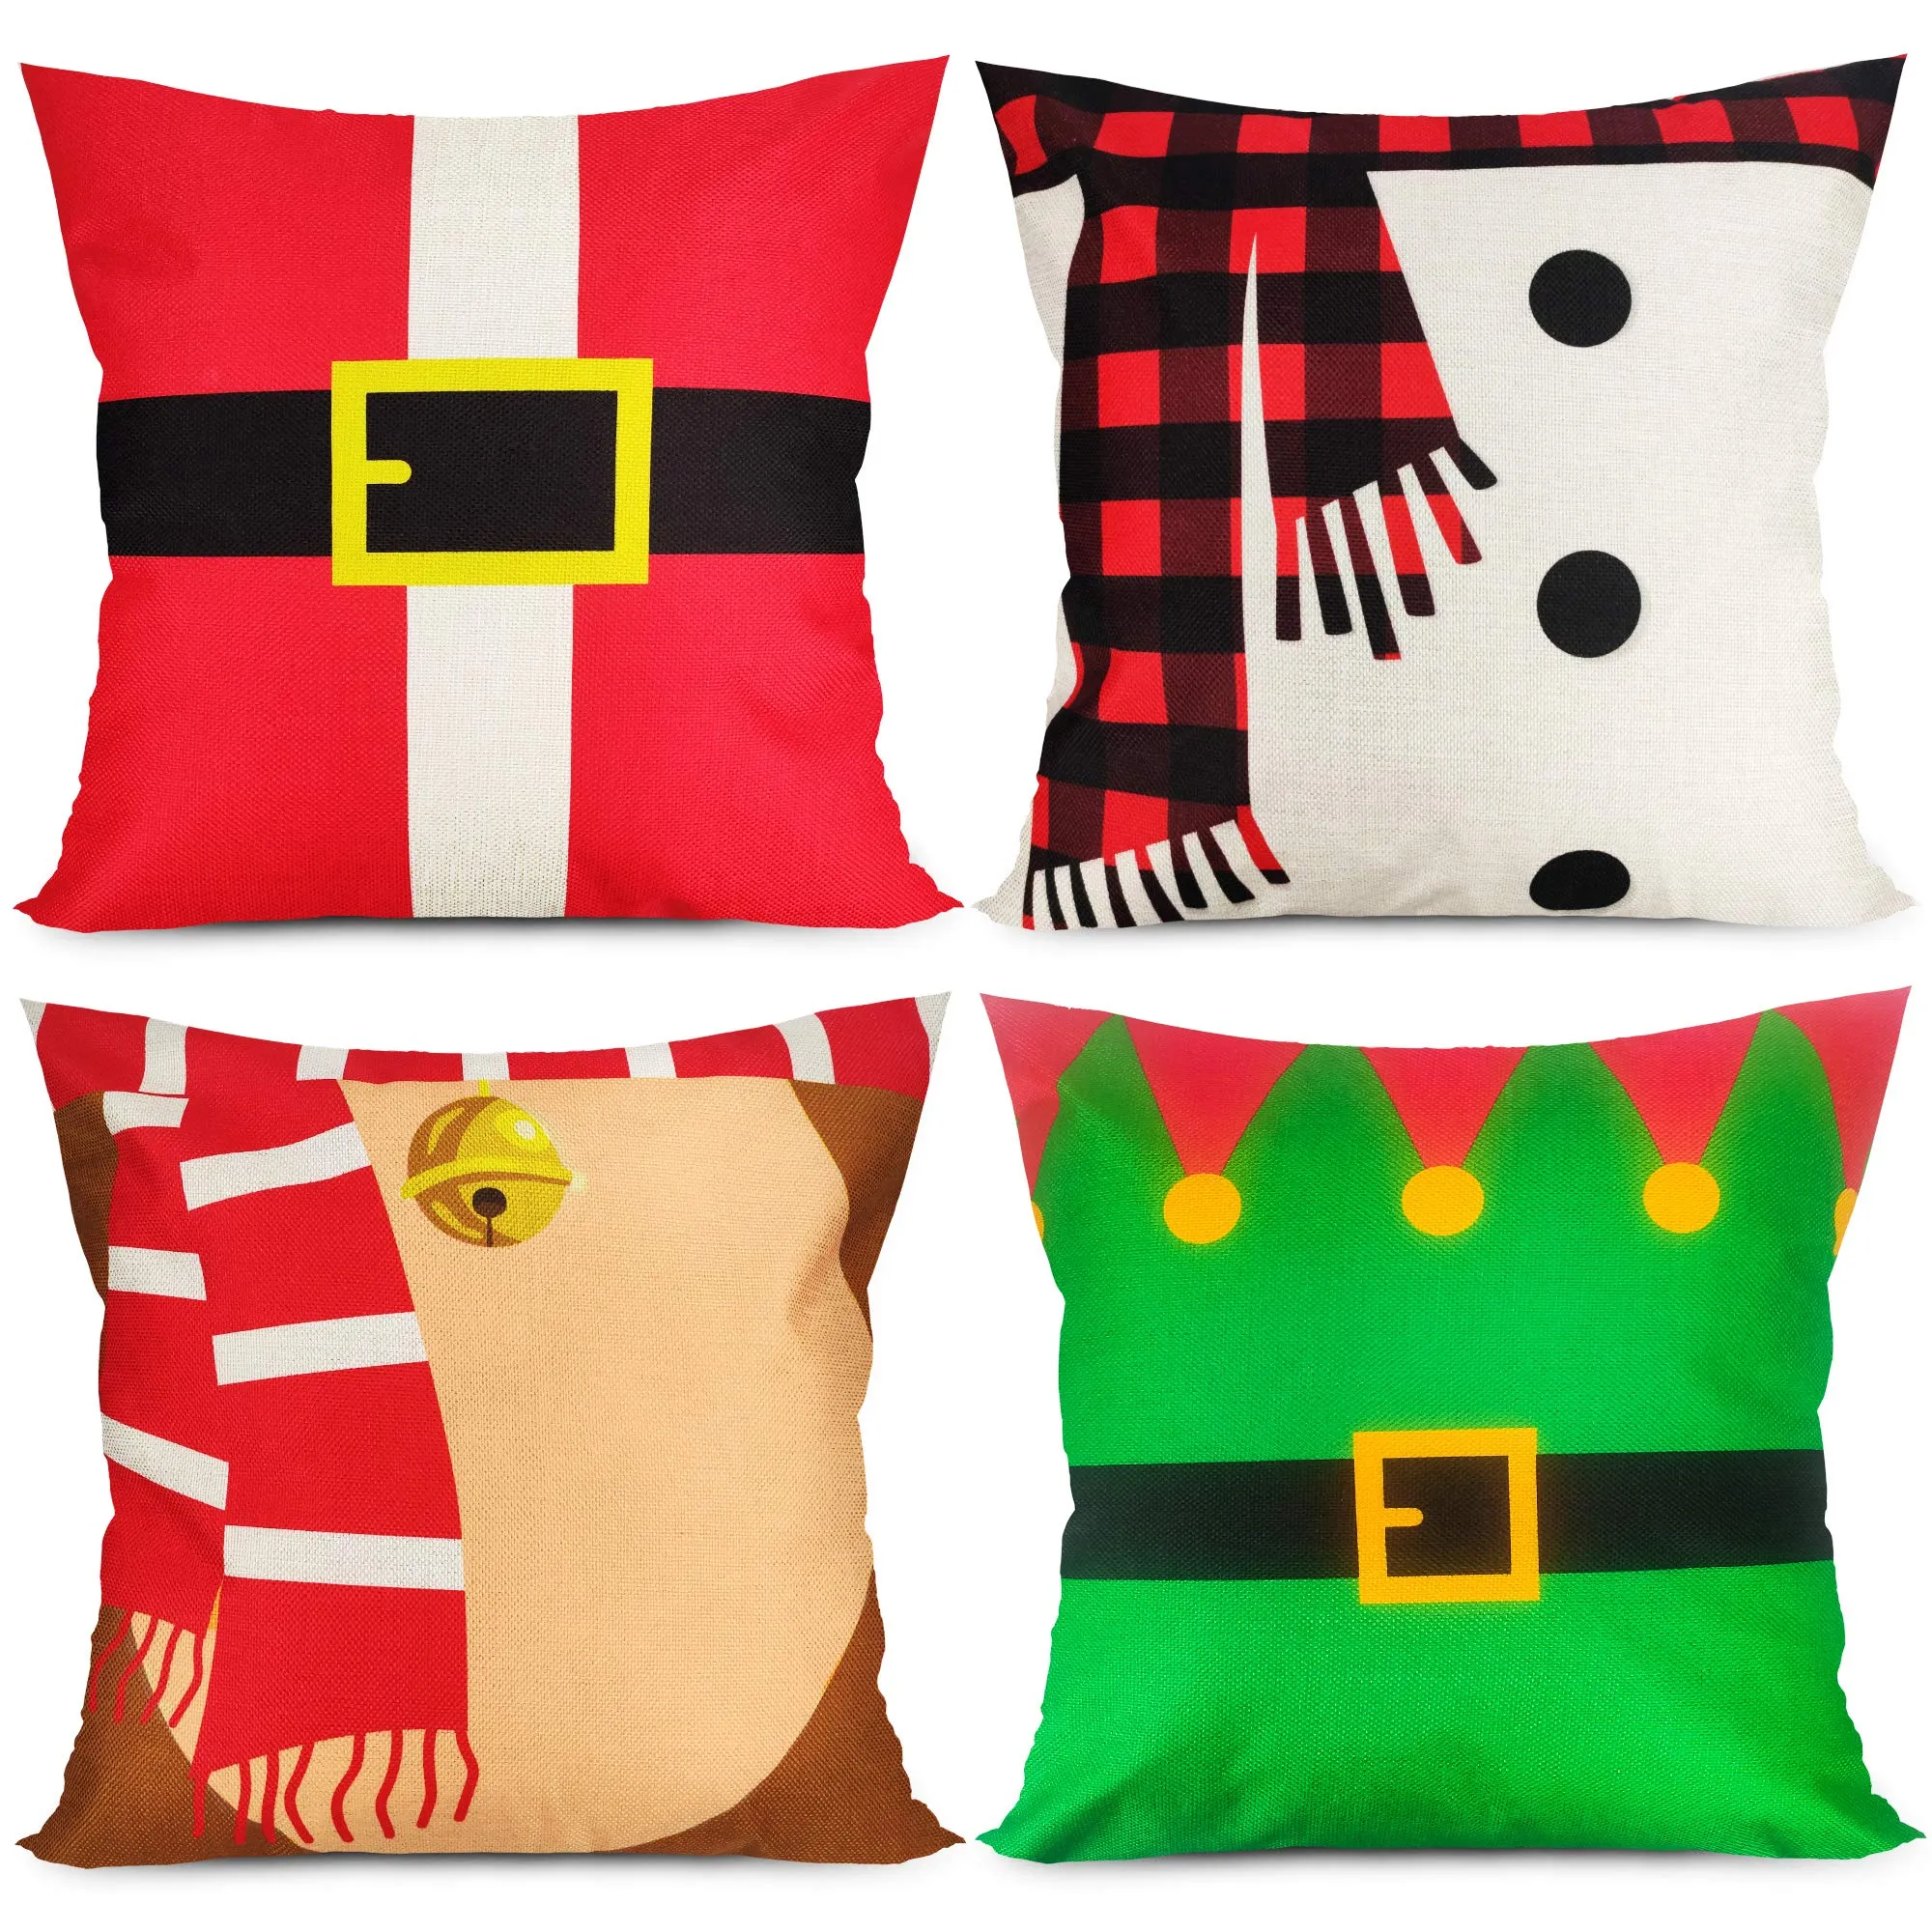 christmas pillowcase, christmas decorations square zipper pillowcase, 18*18 inch set of linen autumn and winter sofa pillowcase, christmas tree, deer, truck, red plaid pattern.